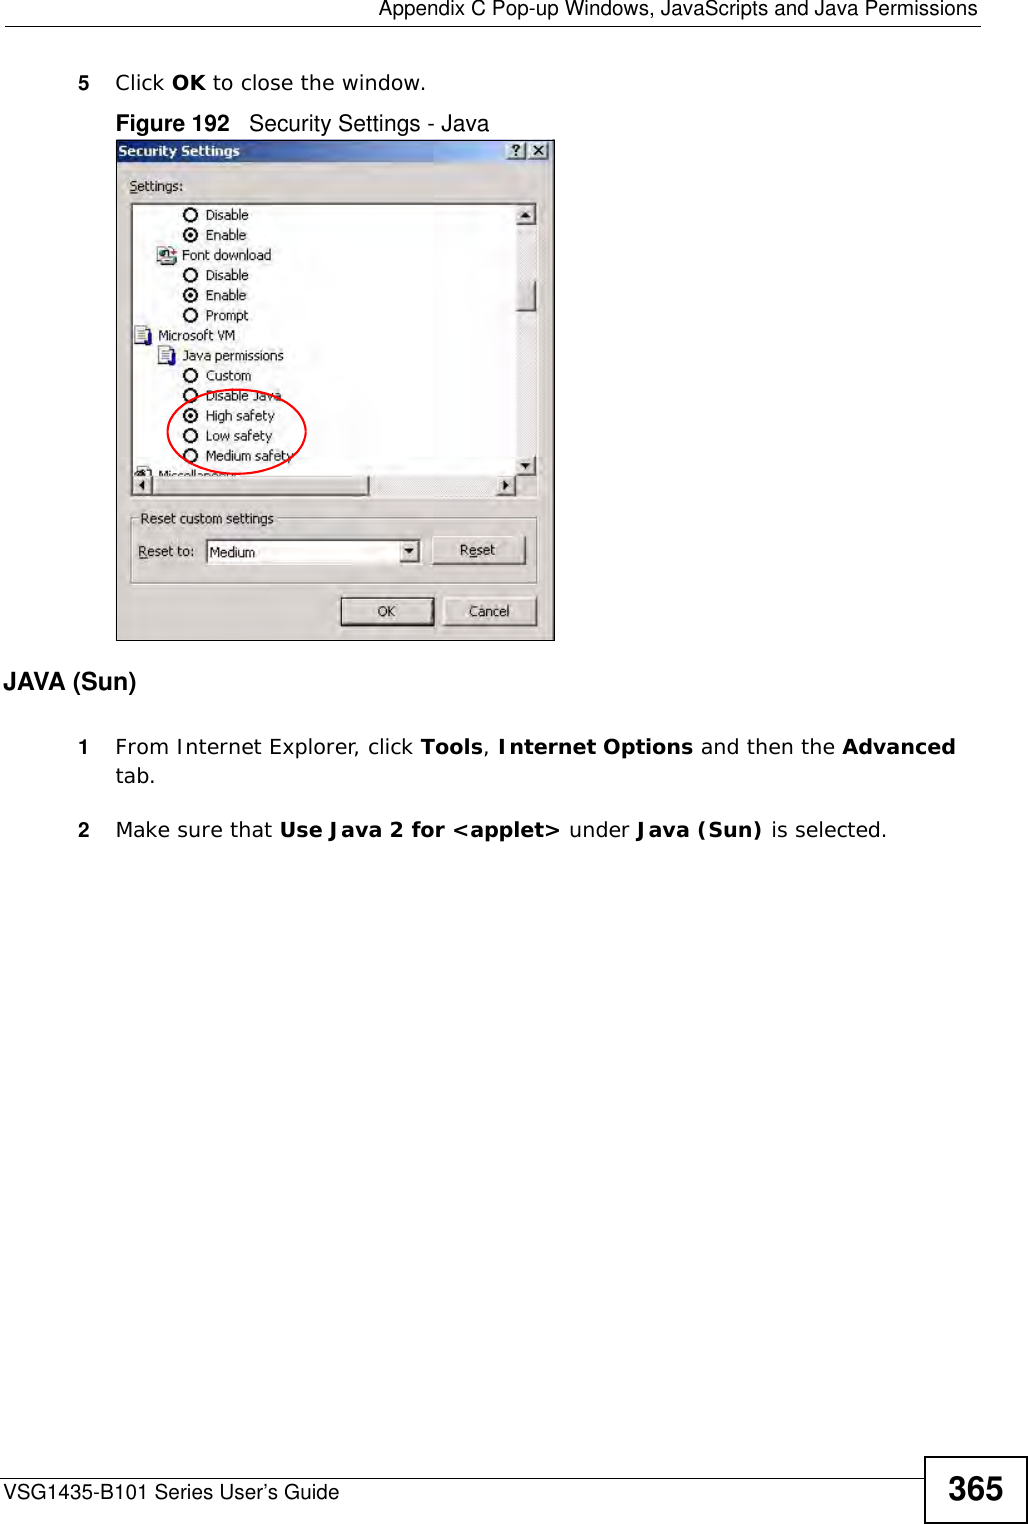  Appendix C Pop-up Windows, JavaScripts and Java PermissionsVSG1435-B101 Series User’s Guide 3655Click OK to close the window.Figure 192   Security Settings - Java JAVA (Sun)1From Internet Explorer, click Tools, Internet Options and then the Advanced tab. 2Make sure that Use Java 2 for &lt;applet&gt; under Java (Sun) is selected.